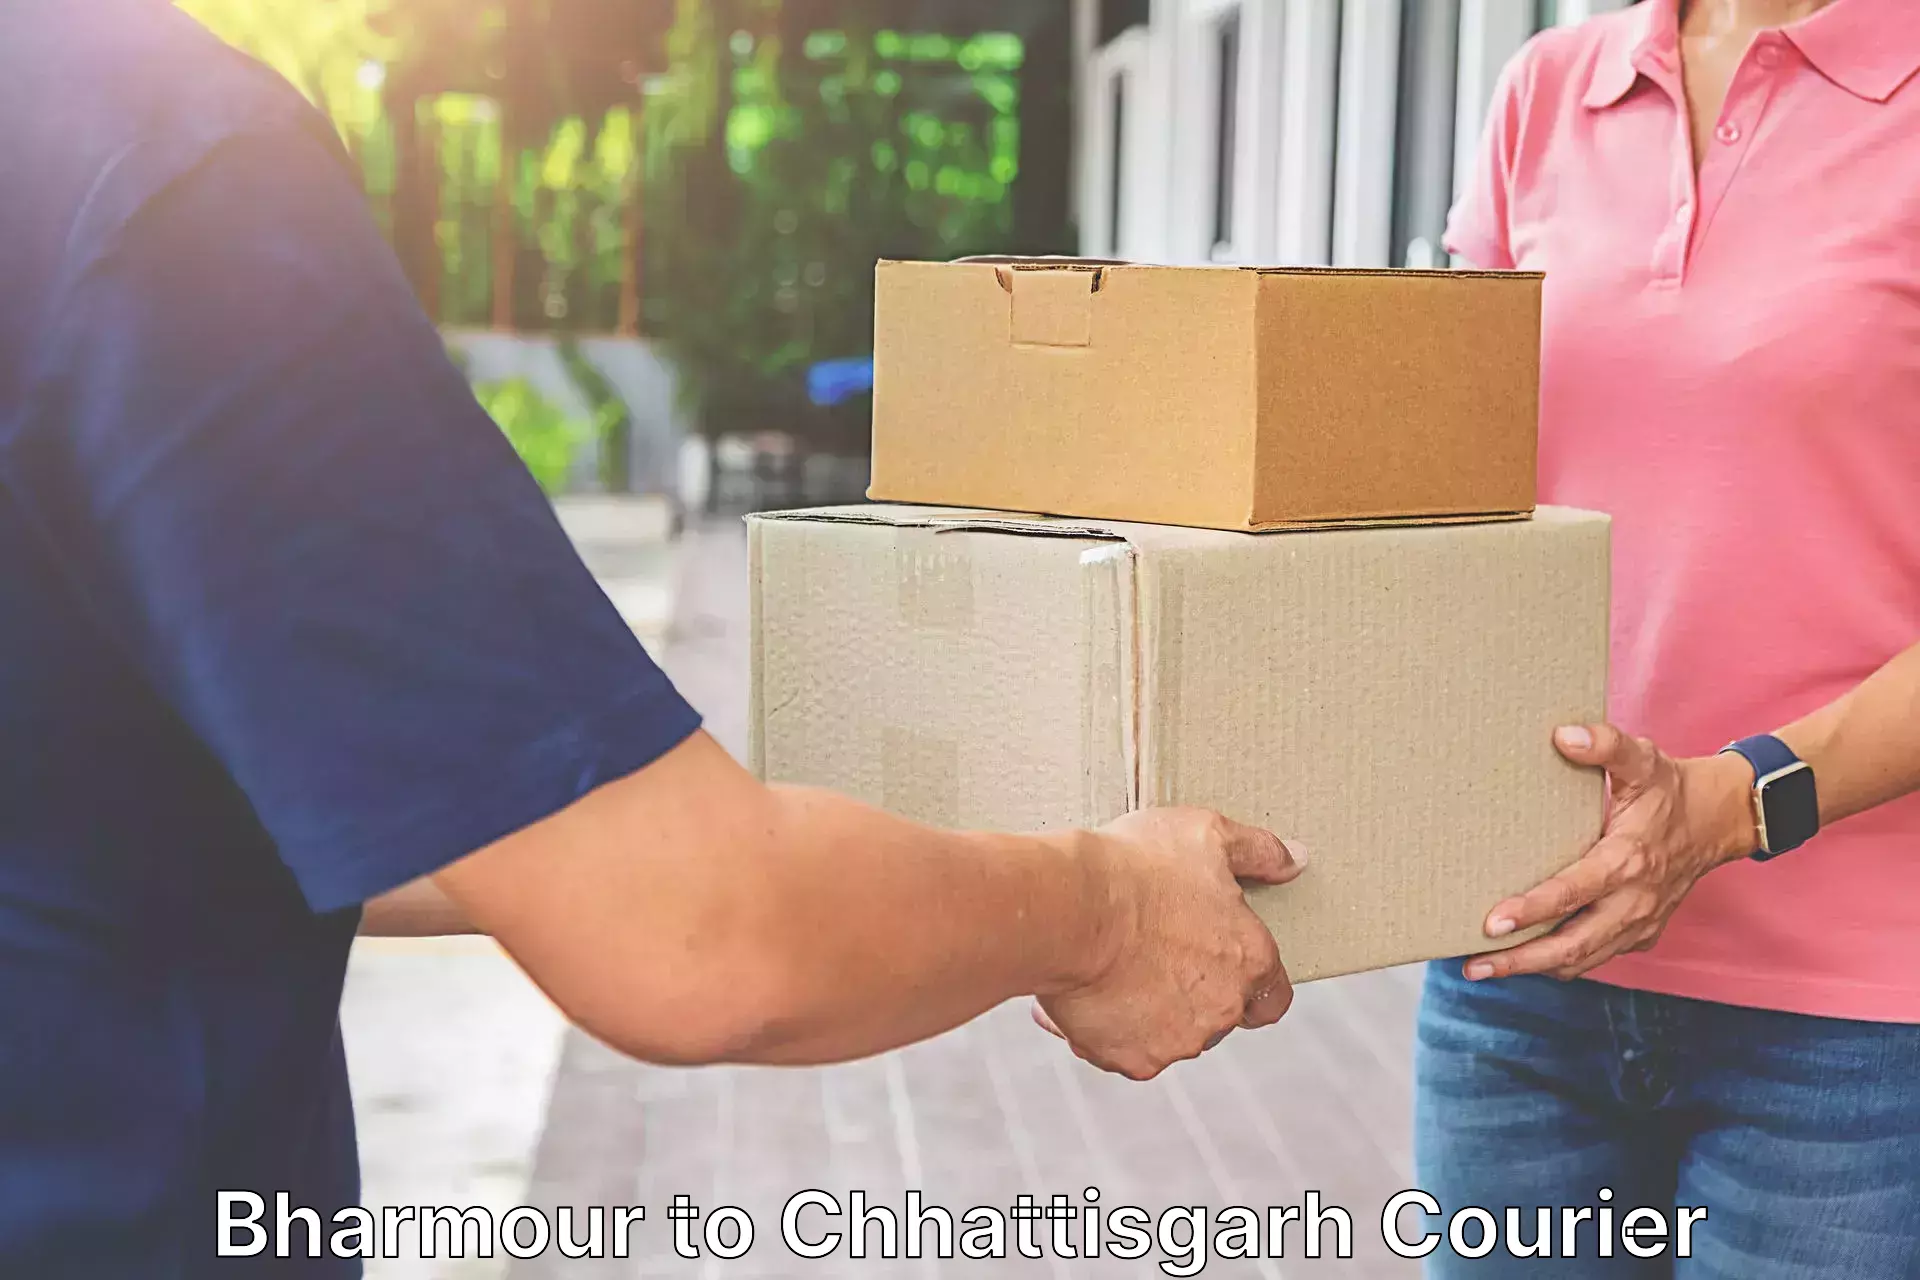 Affordable parcel service Bharmour to Chhattisgarh